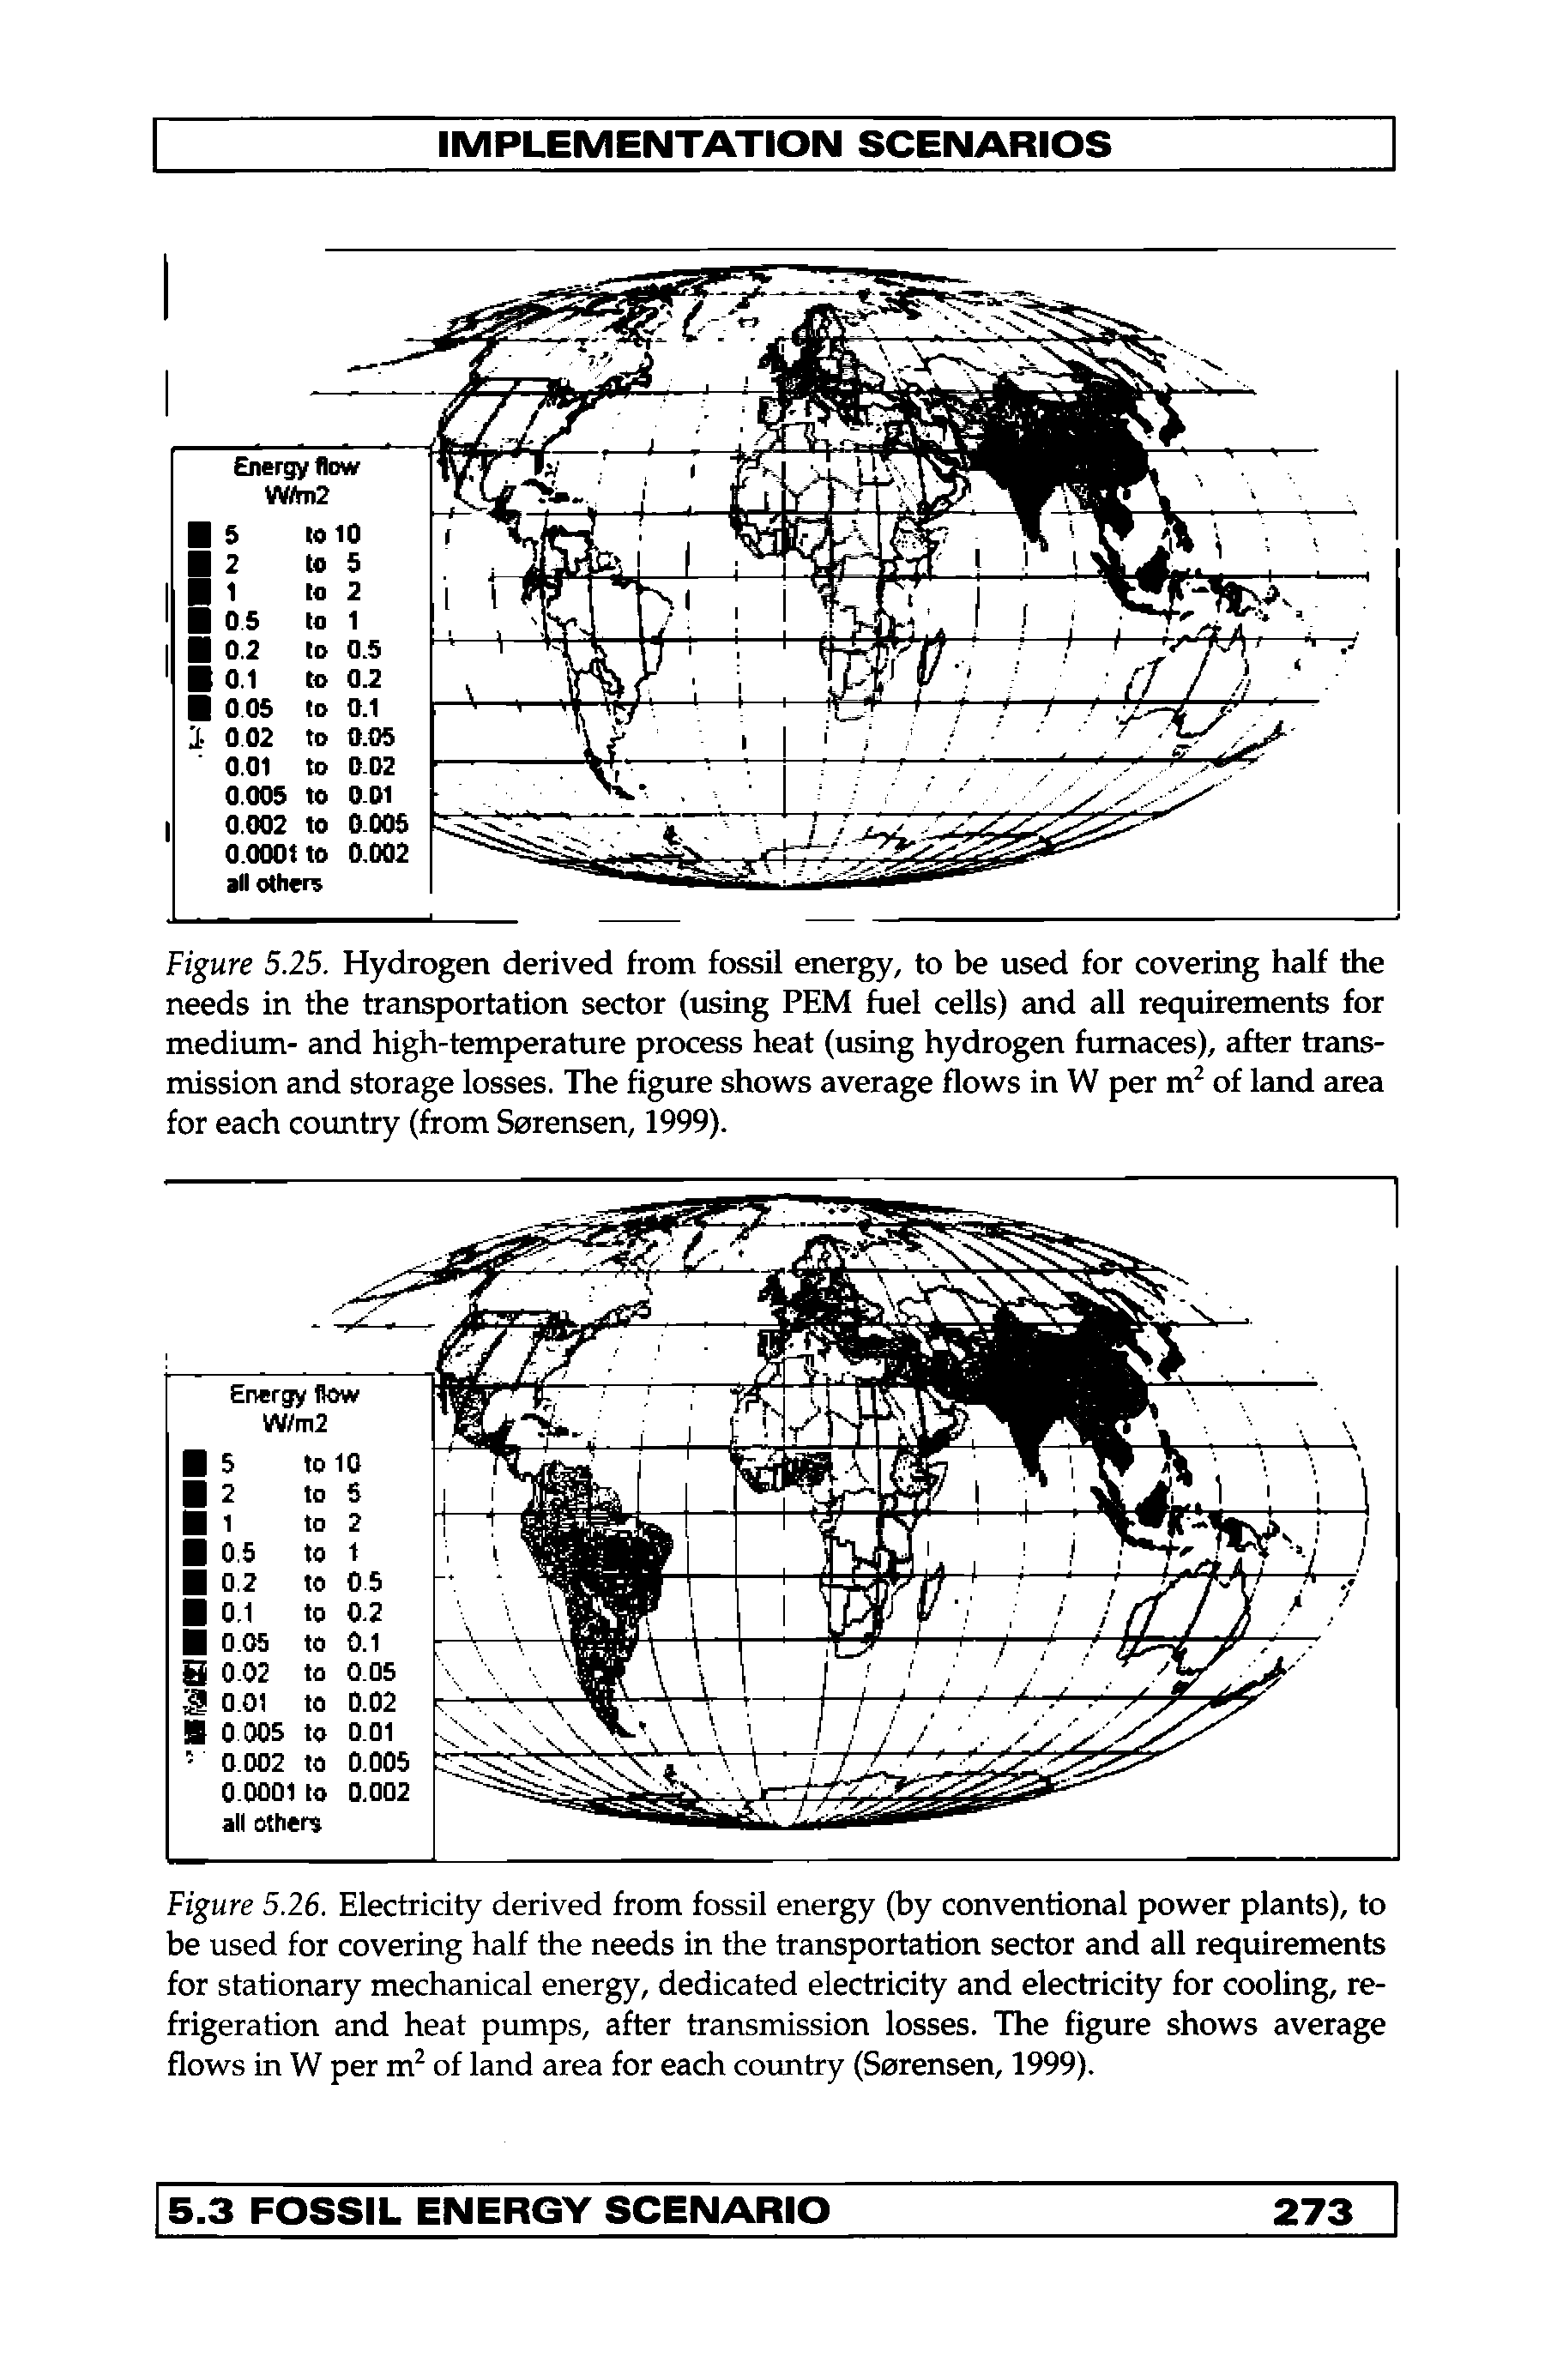 Figure 5.25. Hydrogen derived from fossil energy, to be used for covering half the needs in the transportation sector (using PEM fuel cells) and all requirements for medium- and high-temperature process heat (using hydrogen furnaces), after transmission and storage losses. The figure shows average flows in W per m of land area for each country (from Sorensen, 1999).